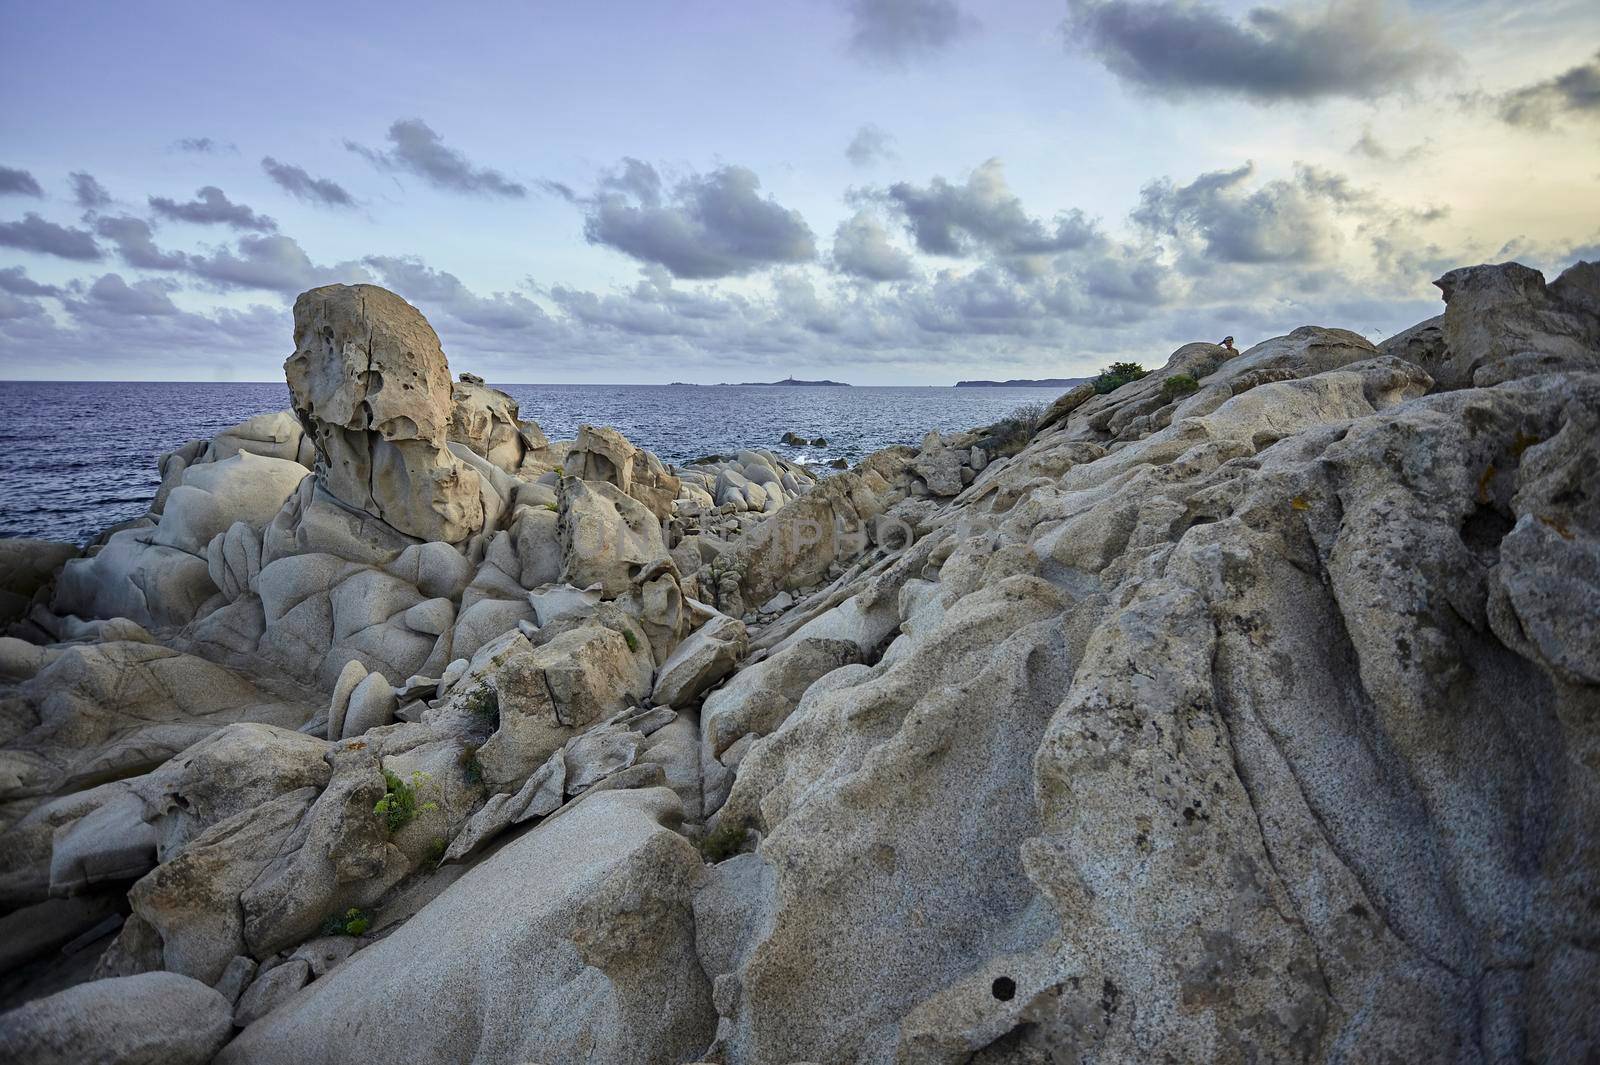 Rock conformations of natural granite that create various forms typical of the coasts of southern Sardinia: a unique and wonderful natural landscape.